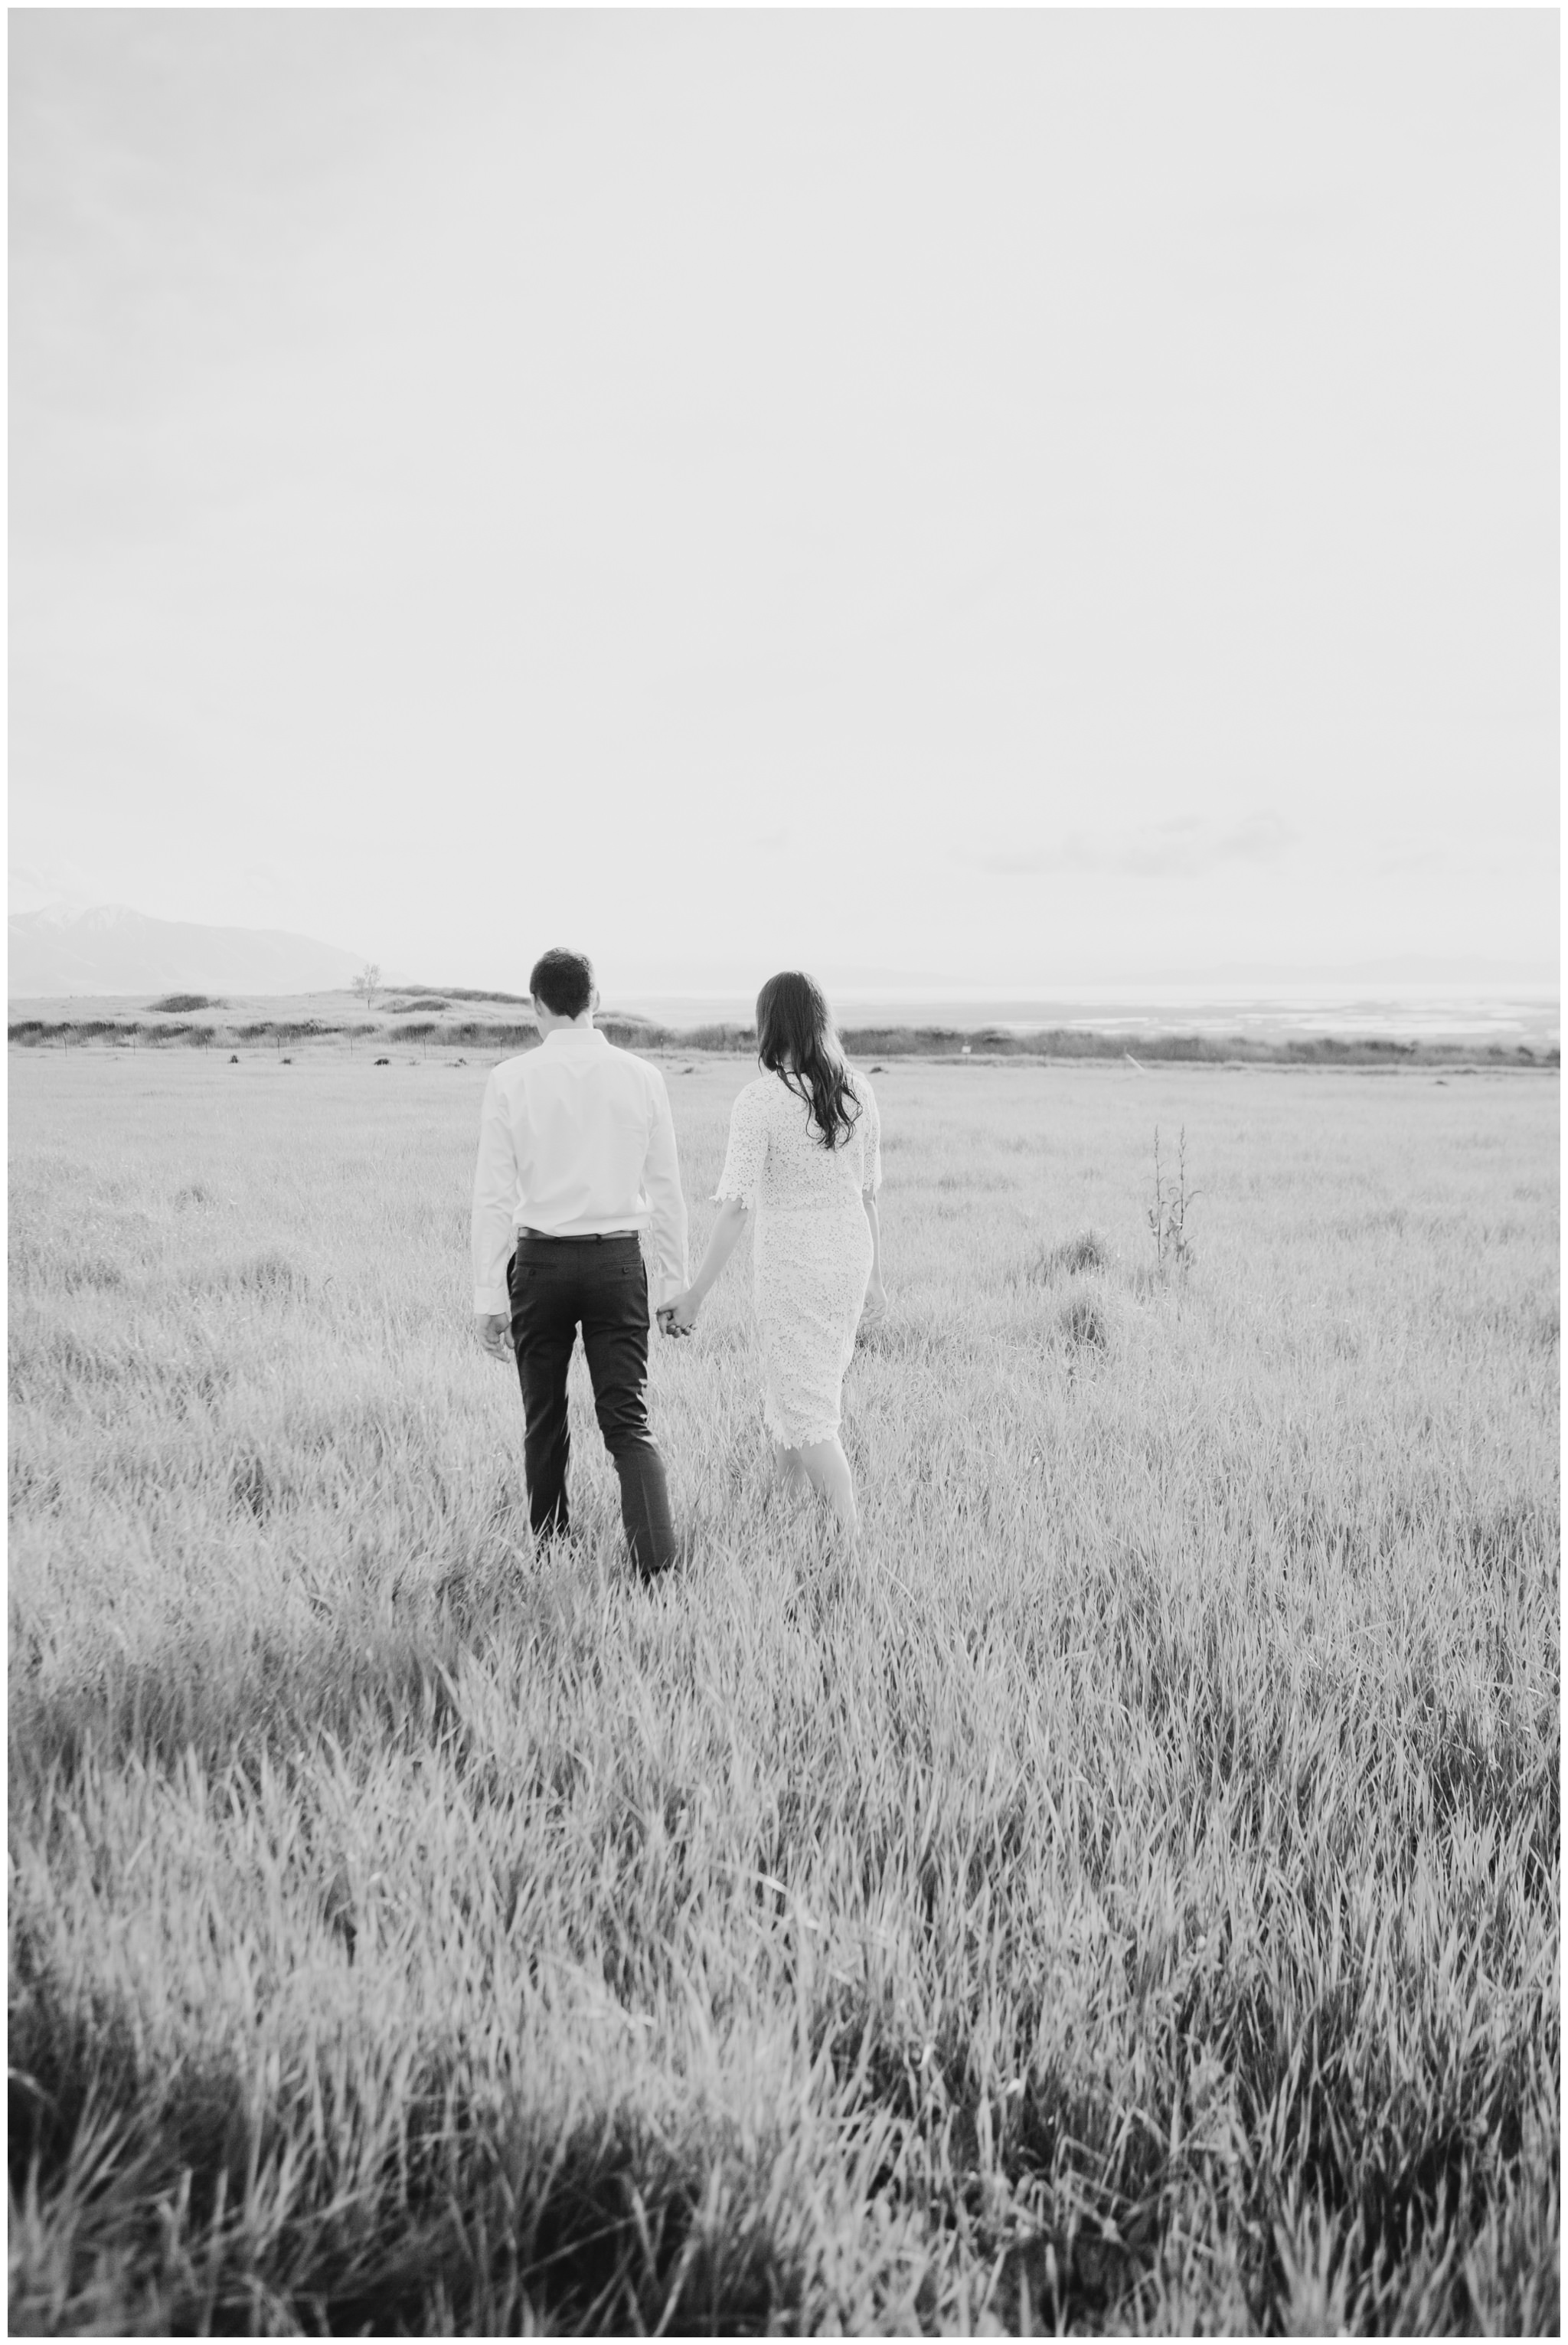 Black and White image of couple walking away together